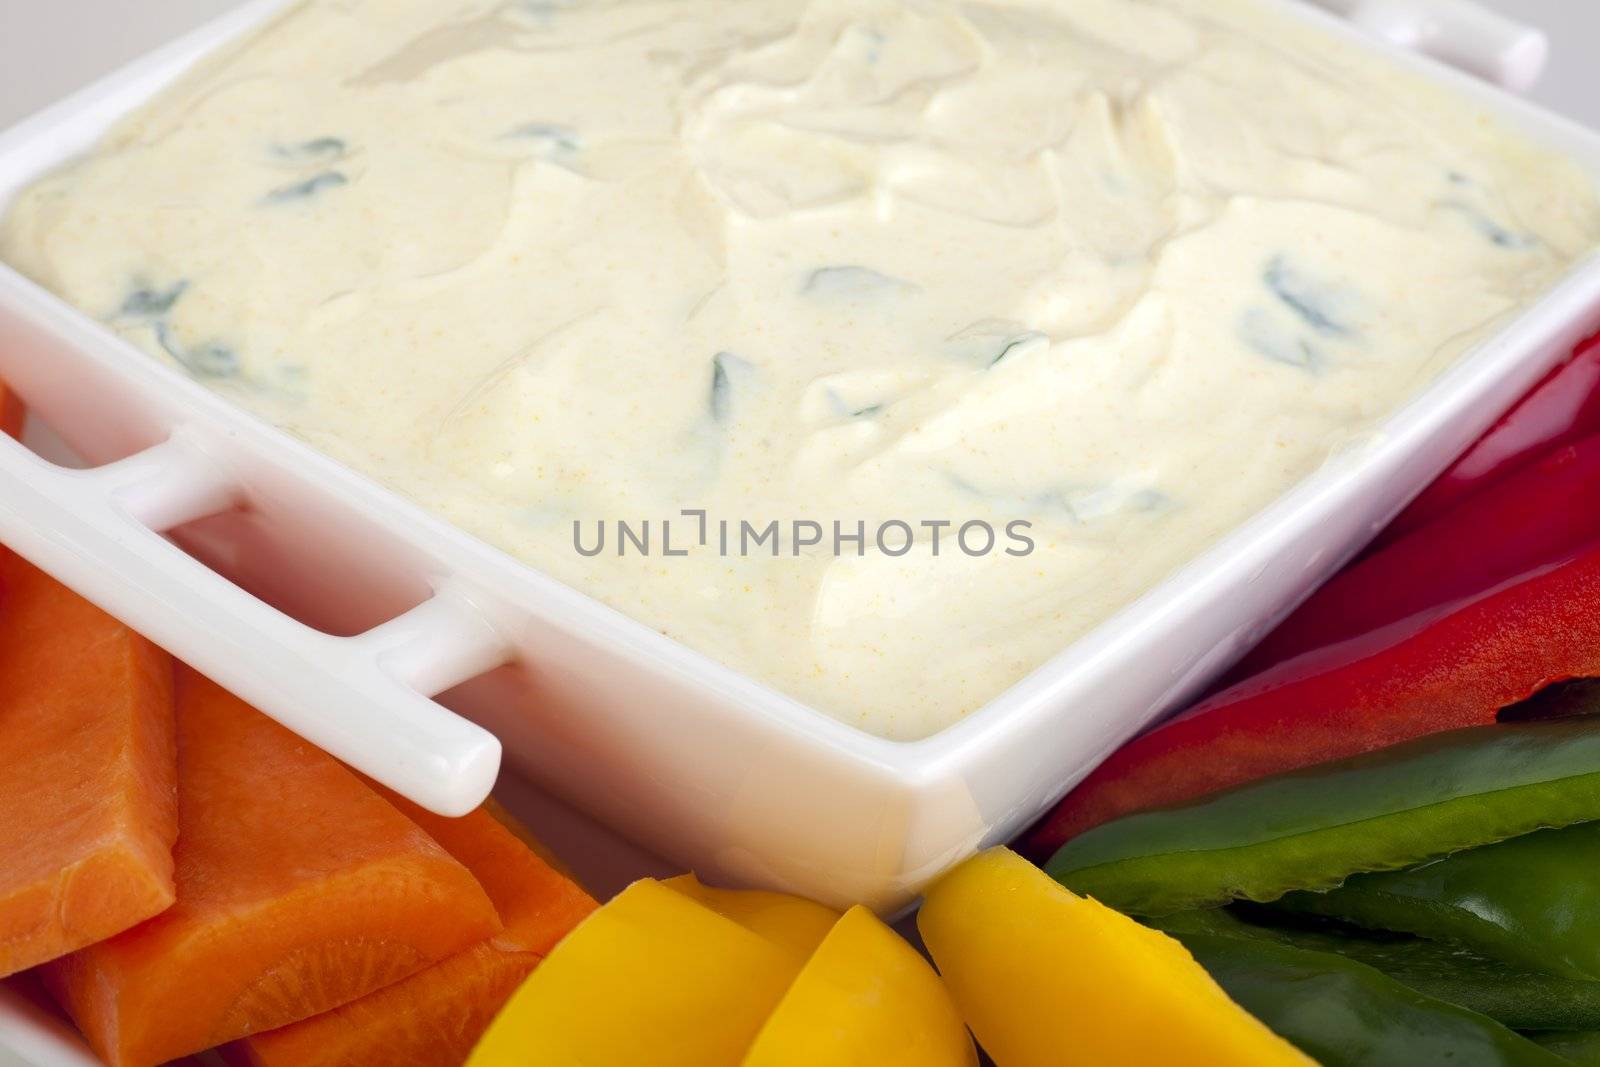 Fresh vegetable sticks and creamy dip appetizer.